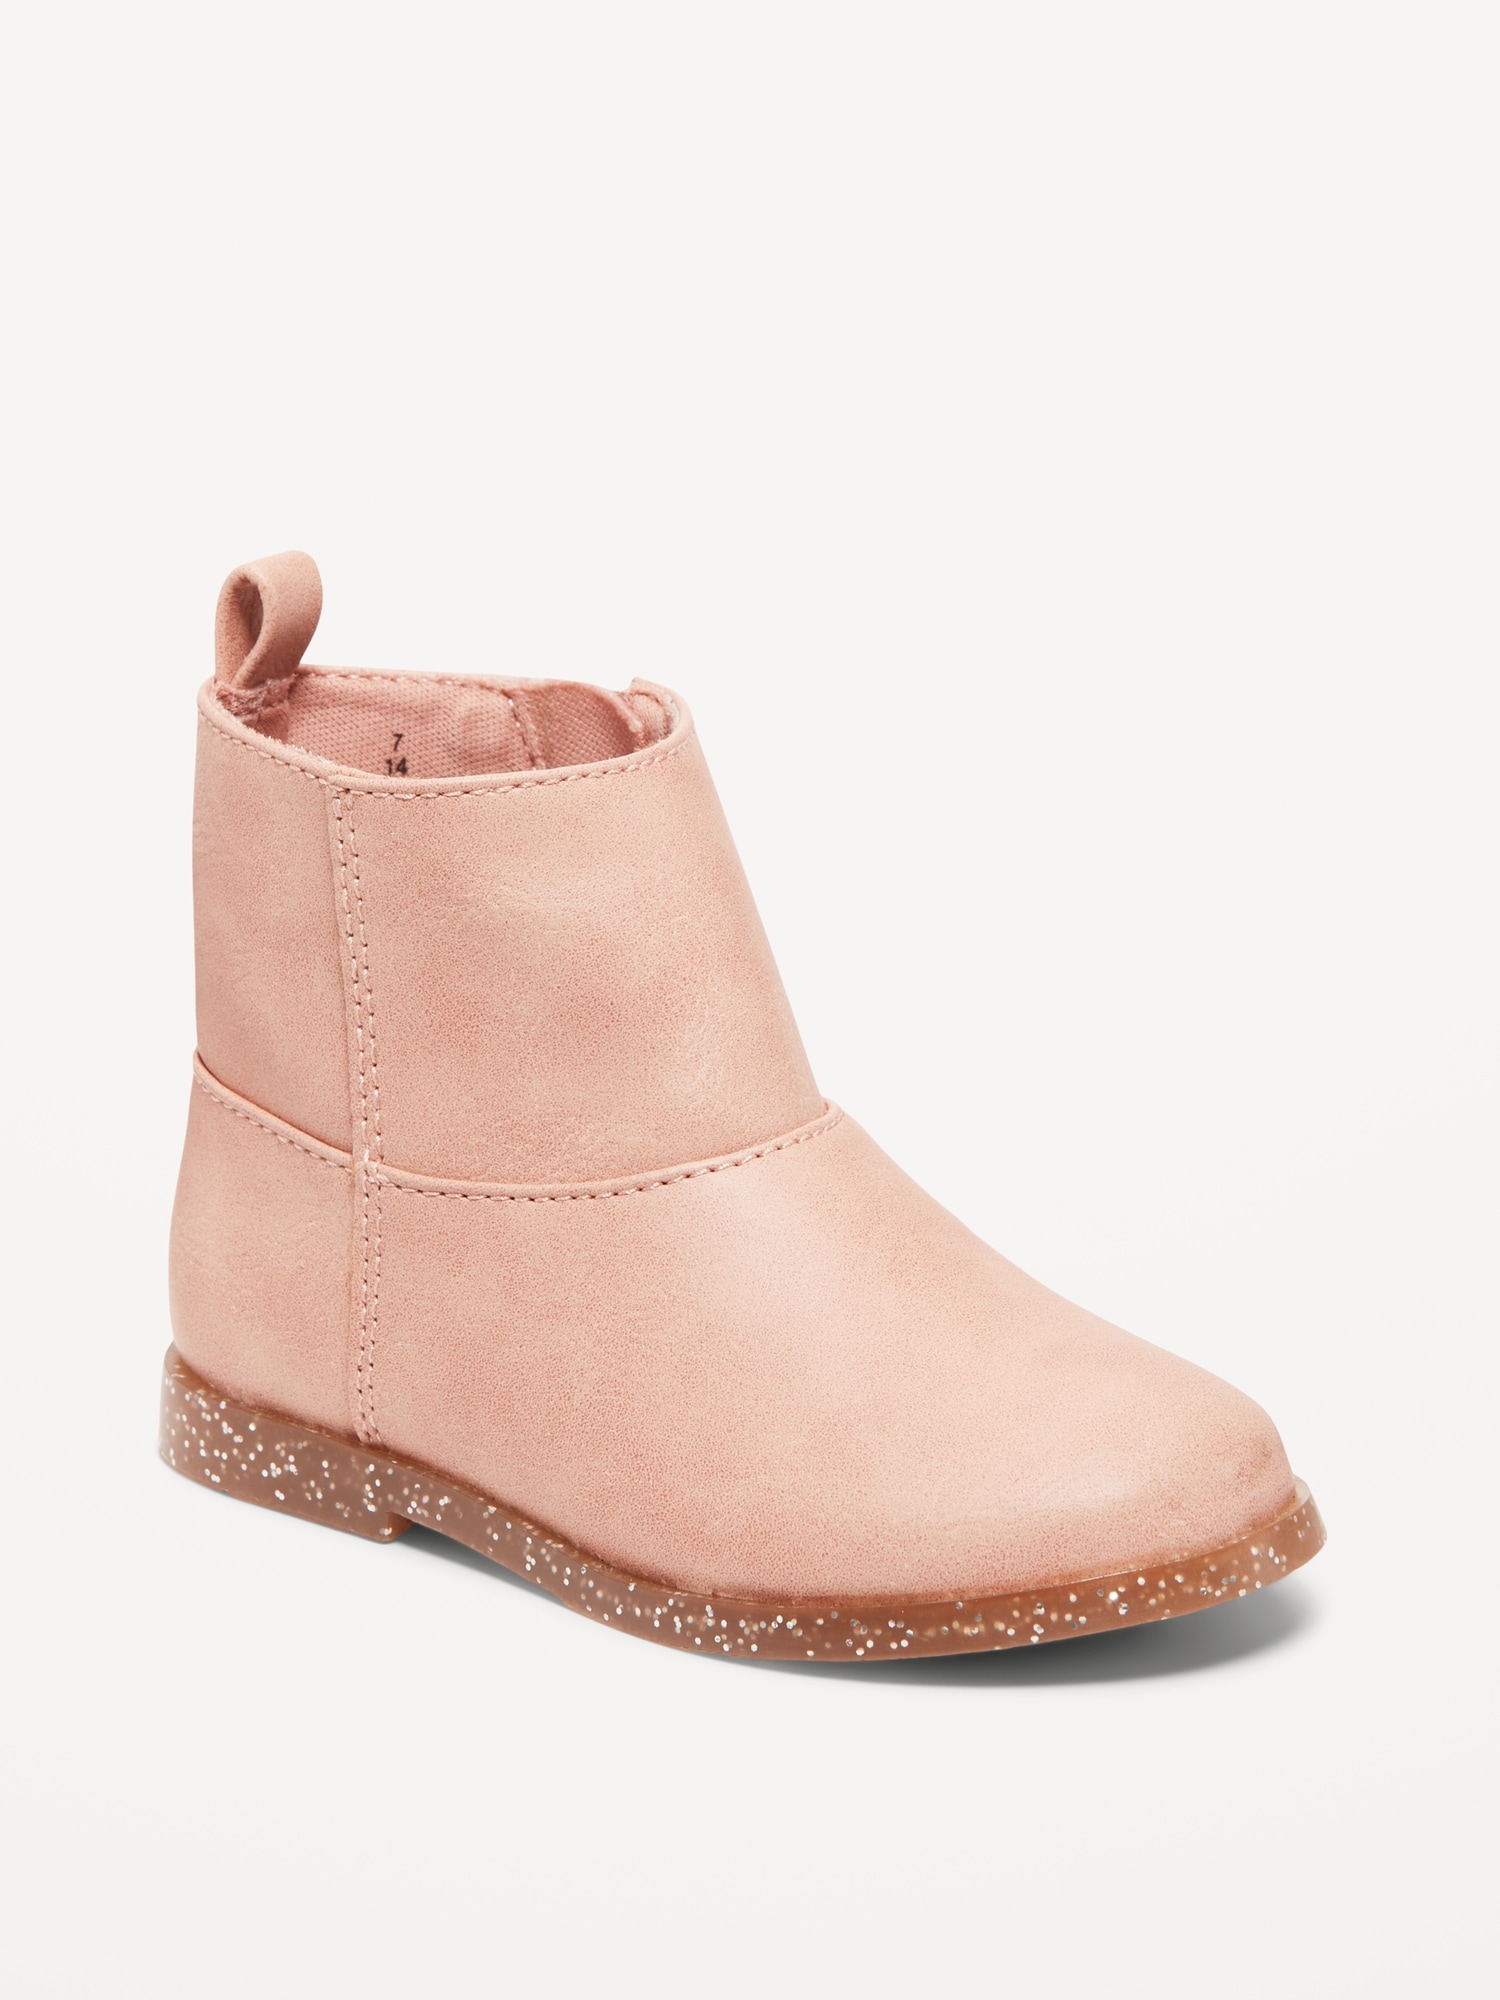 Ankle Booties for Toddler Girls